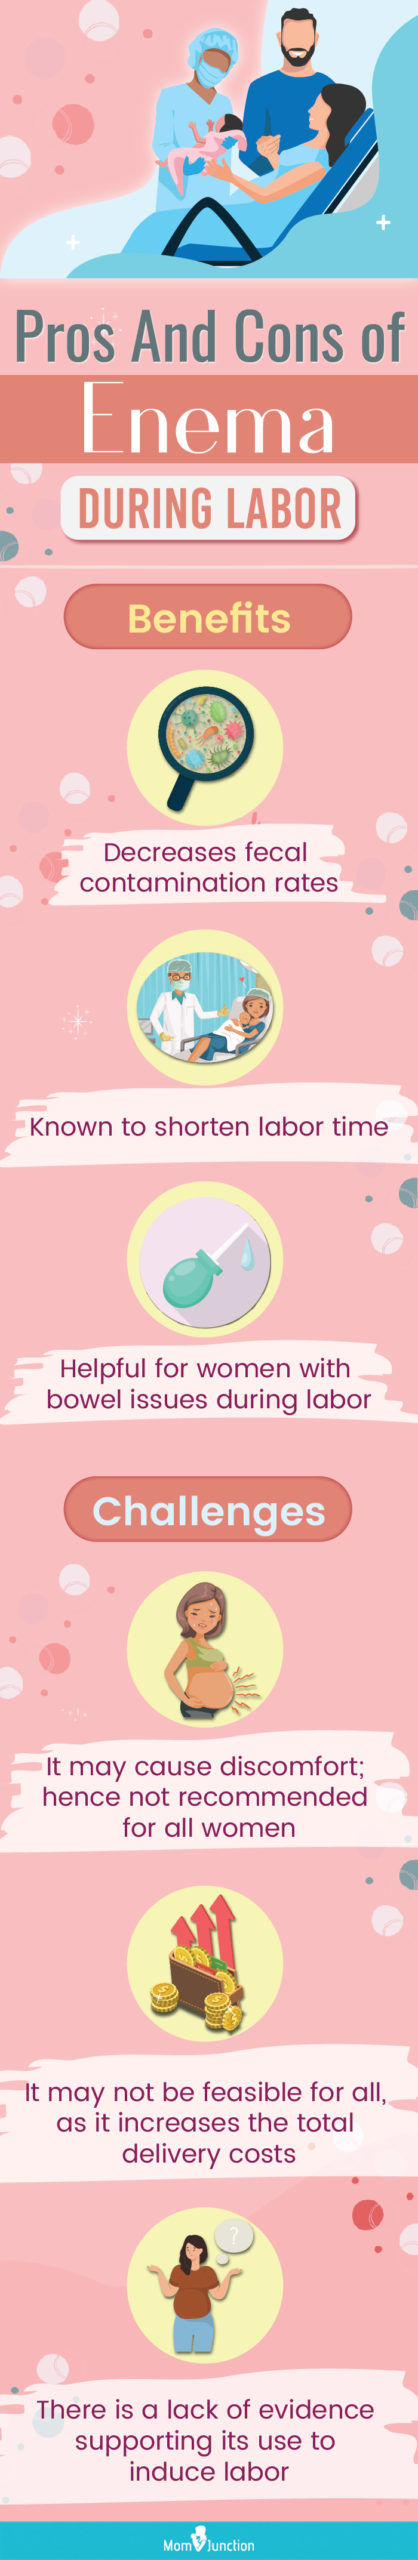 advantages and disadvantages of enema during labor (infographic)